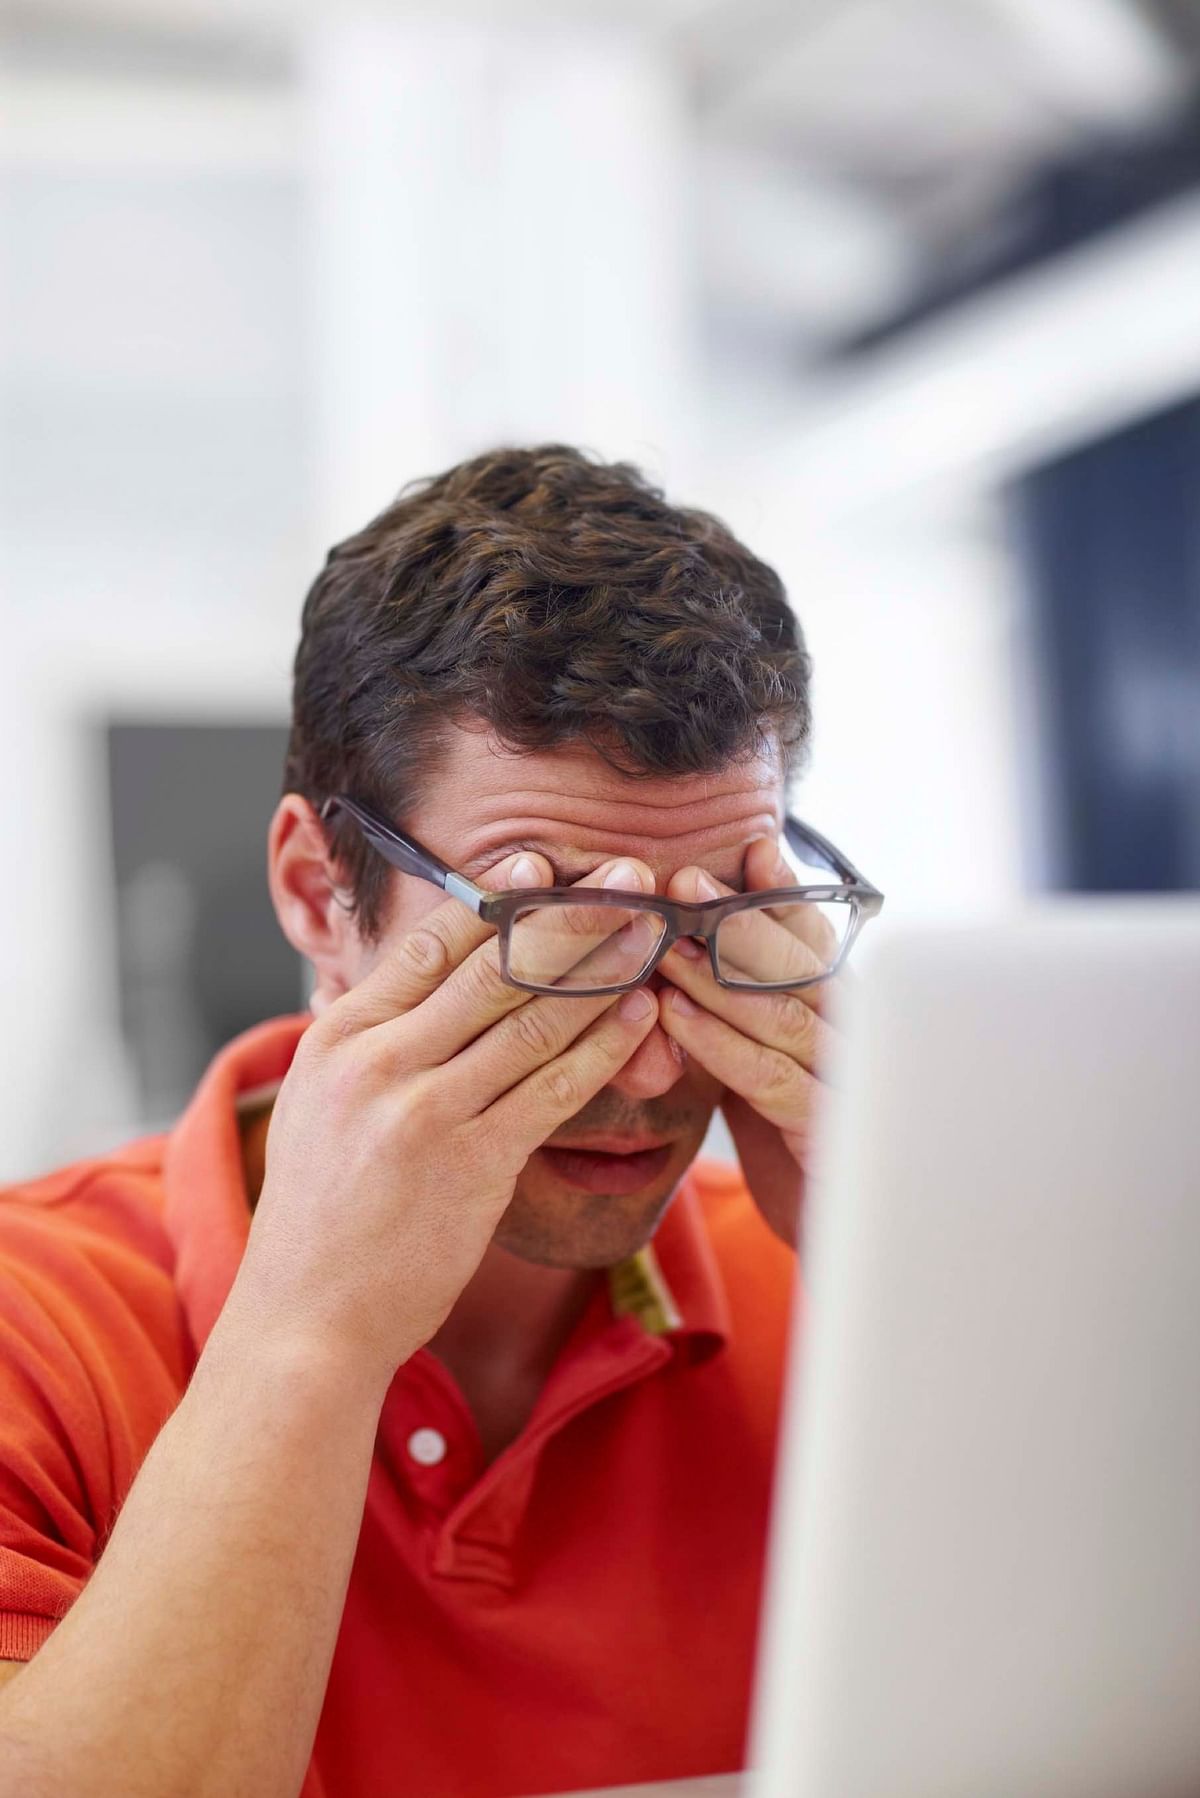 For most of us looking at the screen is unavoidable. So what can you do to protect your eyes?